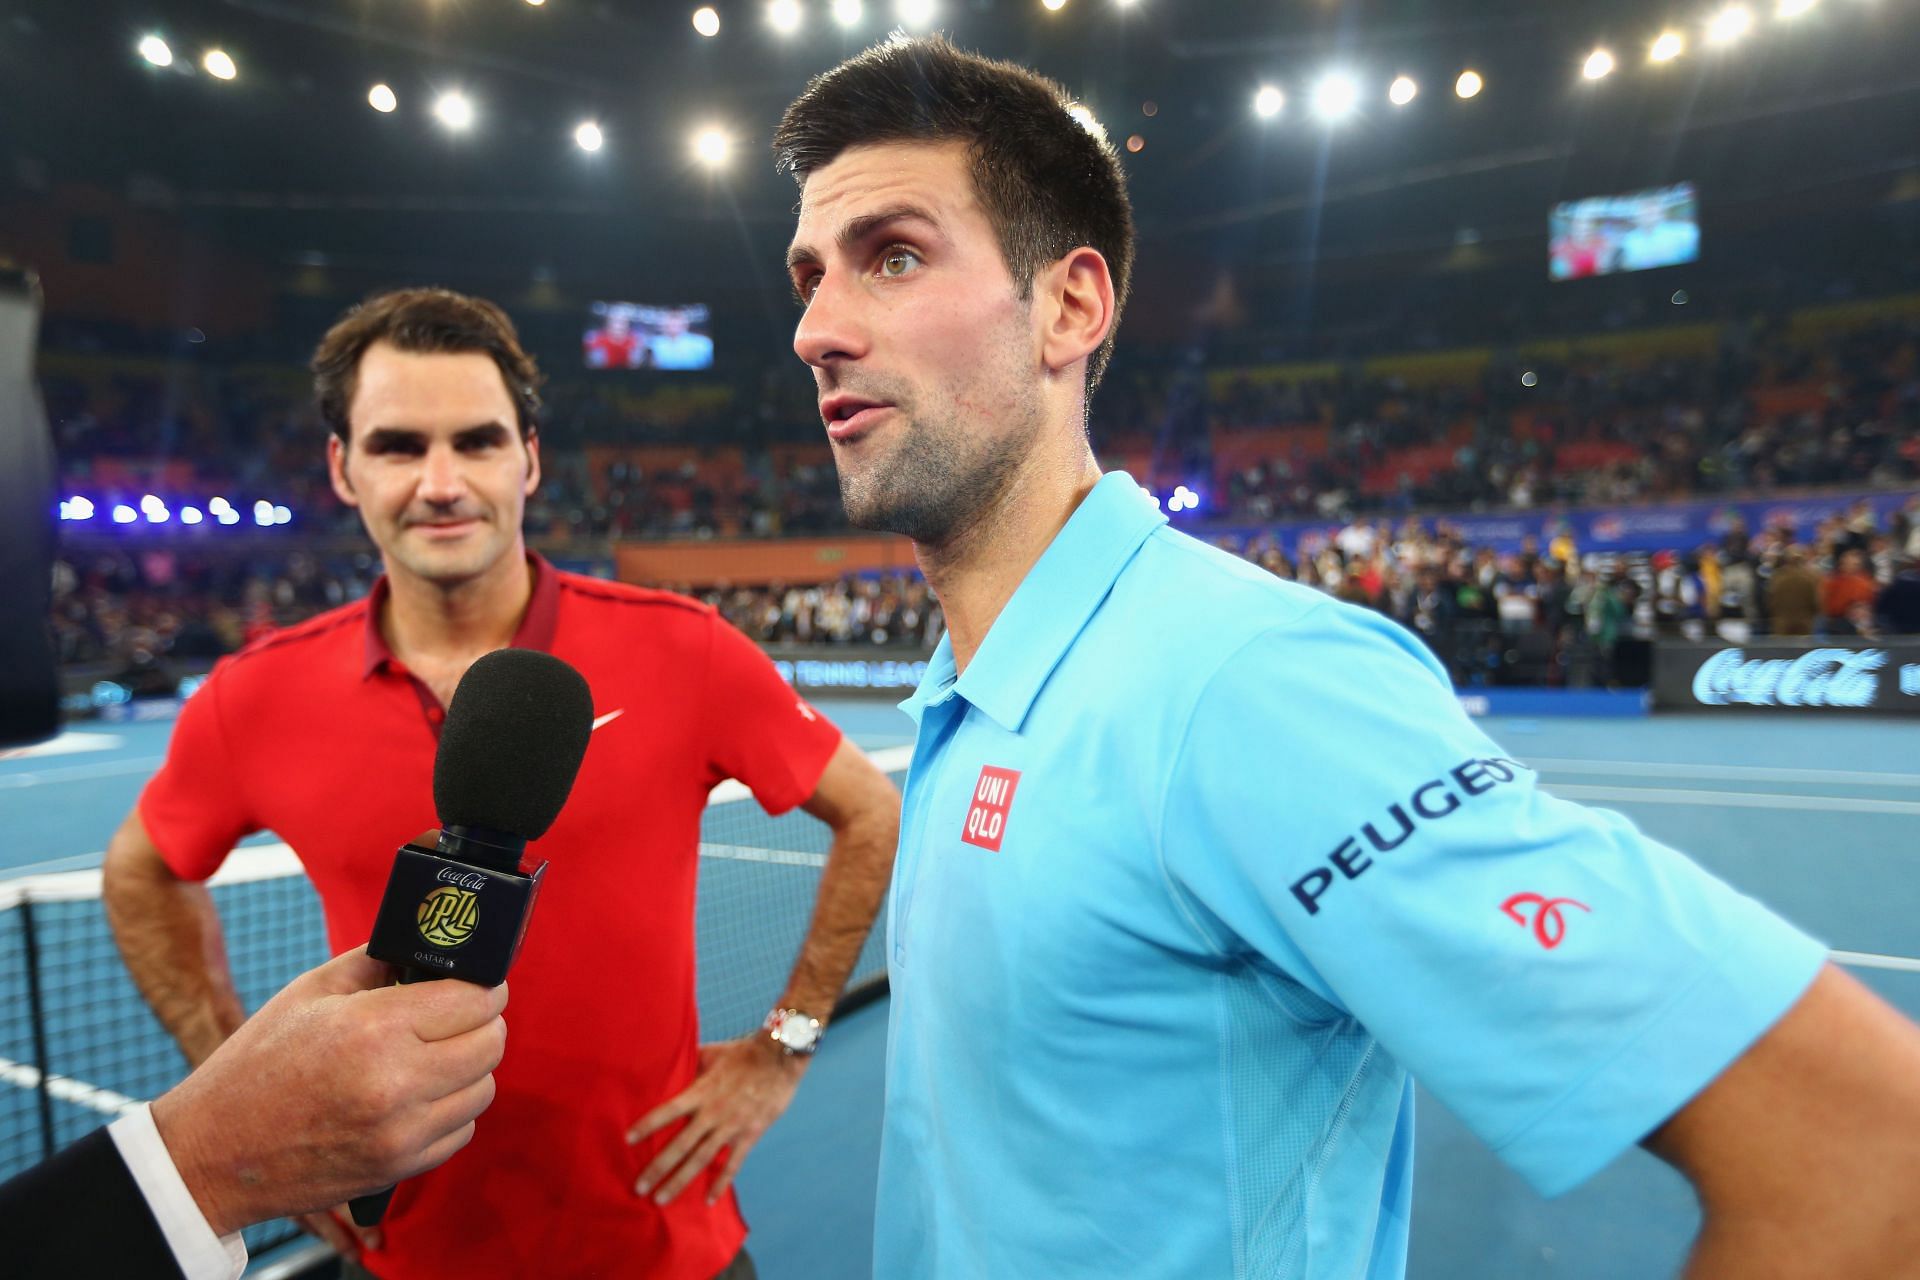 Novak Djokovic and Roger Federer faced each other in Delhi, India 10 years ago